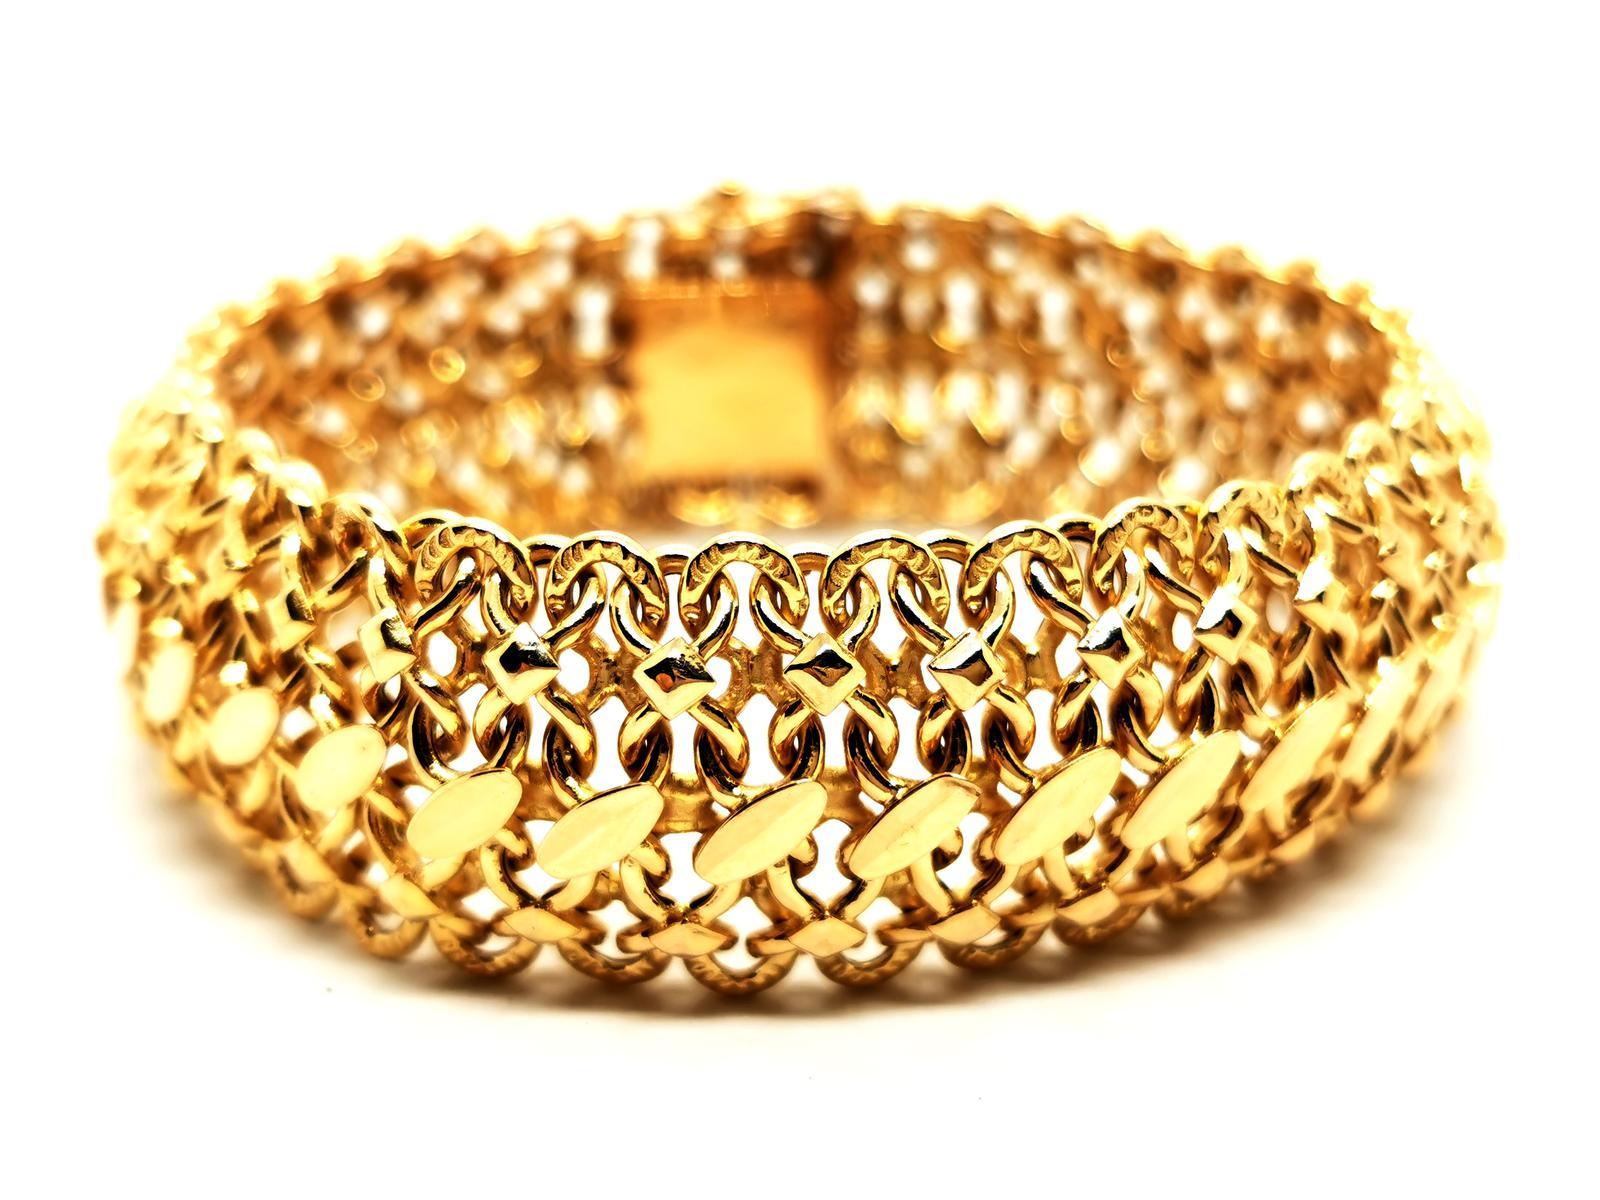 Bracelet in yellow gold 750 thousandths (18 carats). fancy mesh. ratchet clasp in eight safety. length: 19.5 cm. width: 2.07. total weight: 34.61 g. eagle head hallmark. excellent condition.
